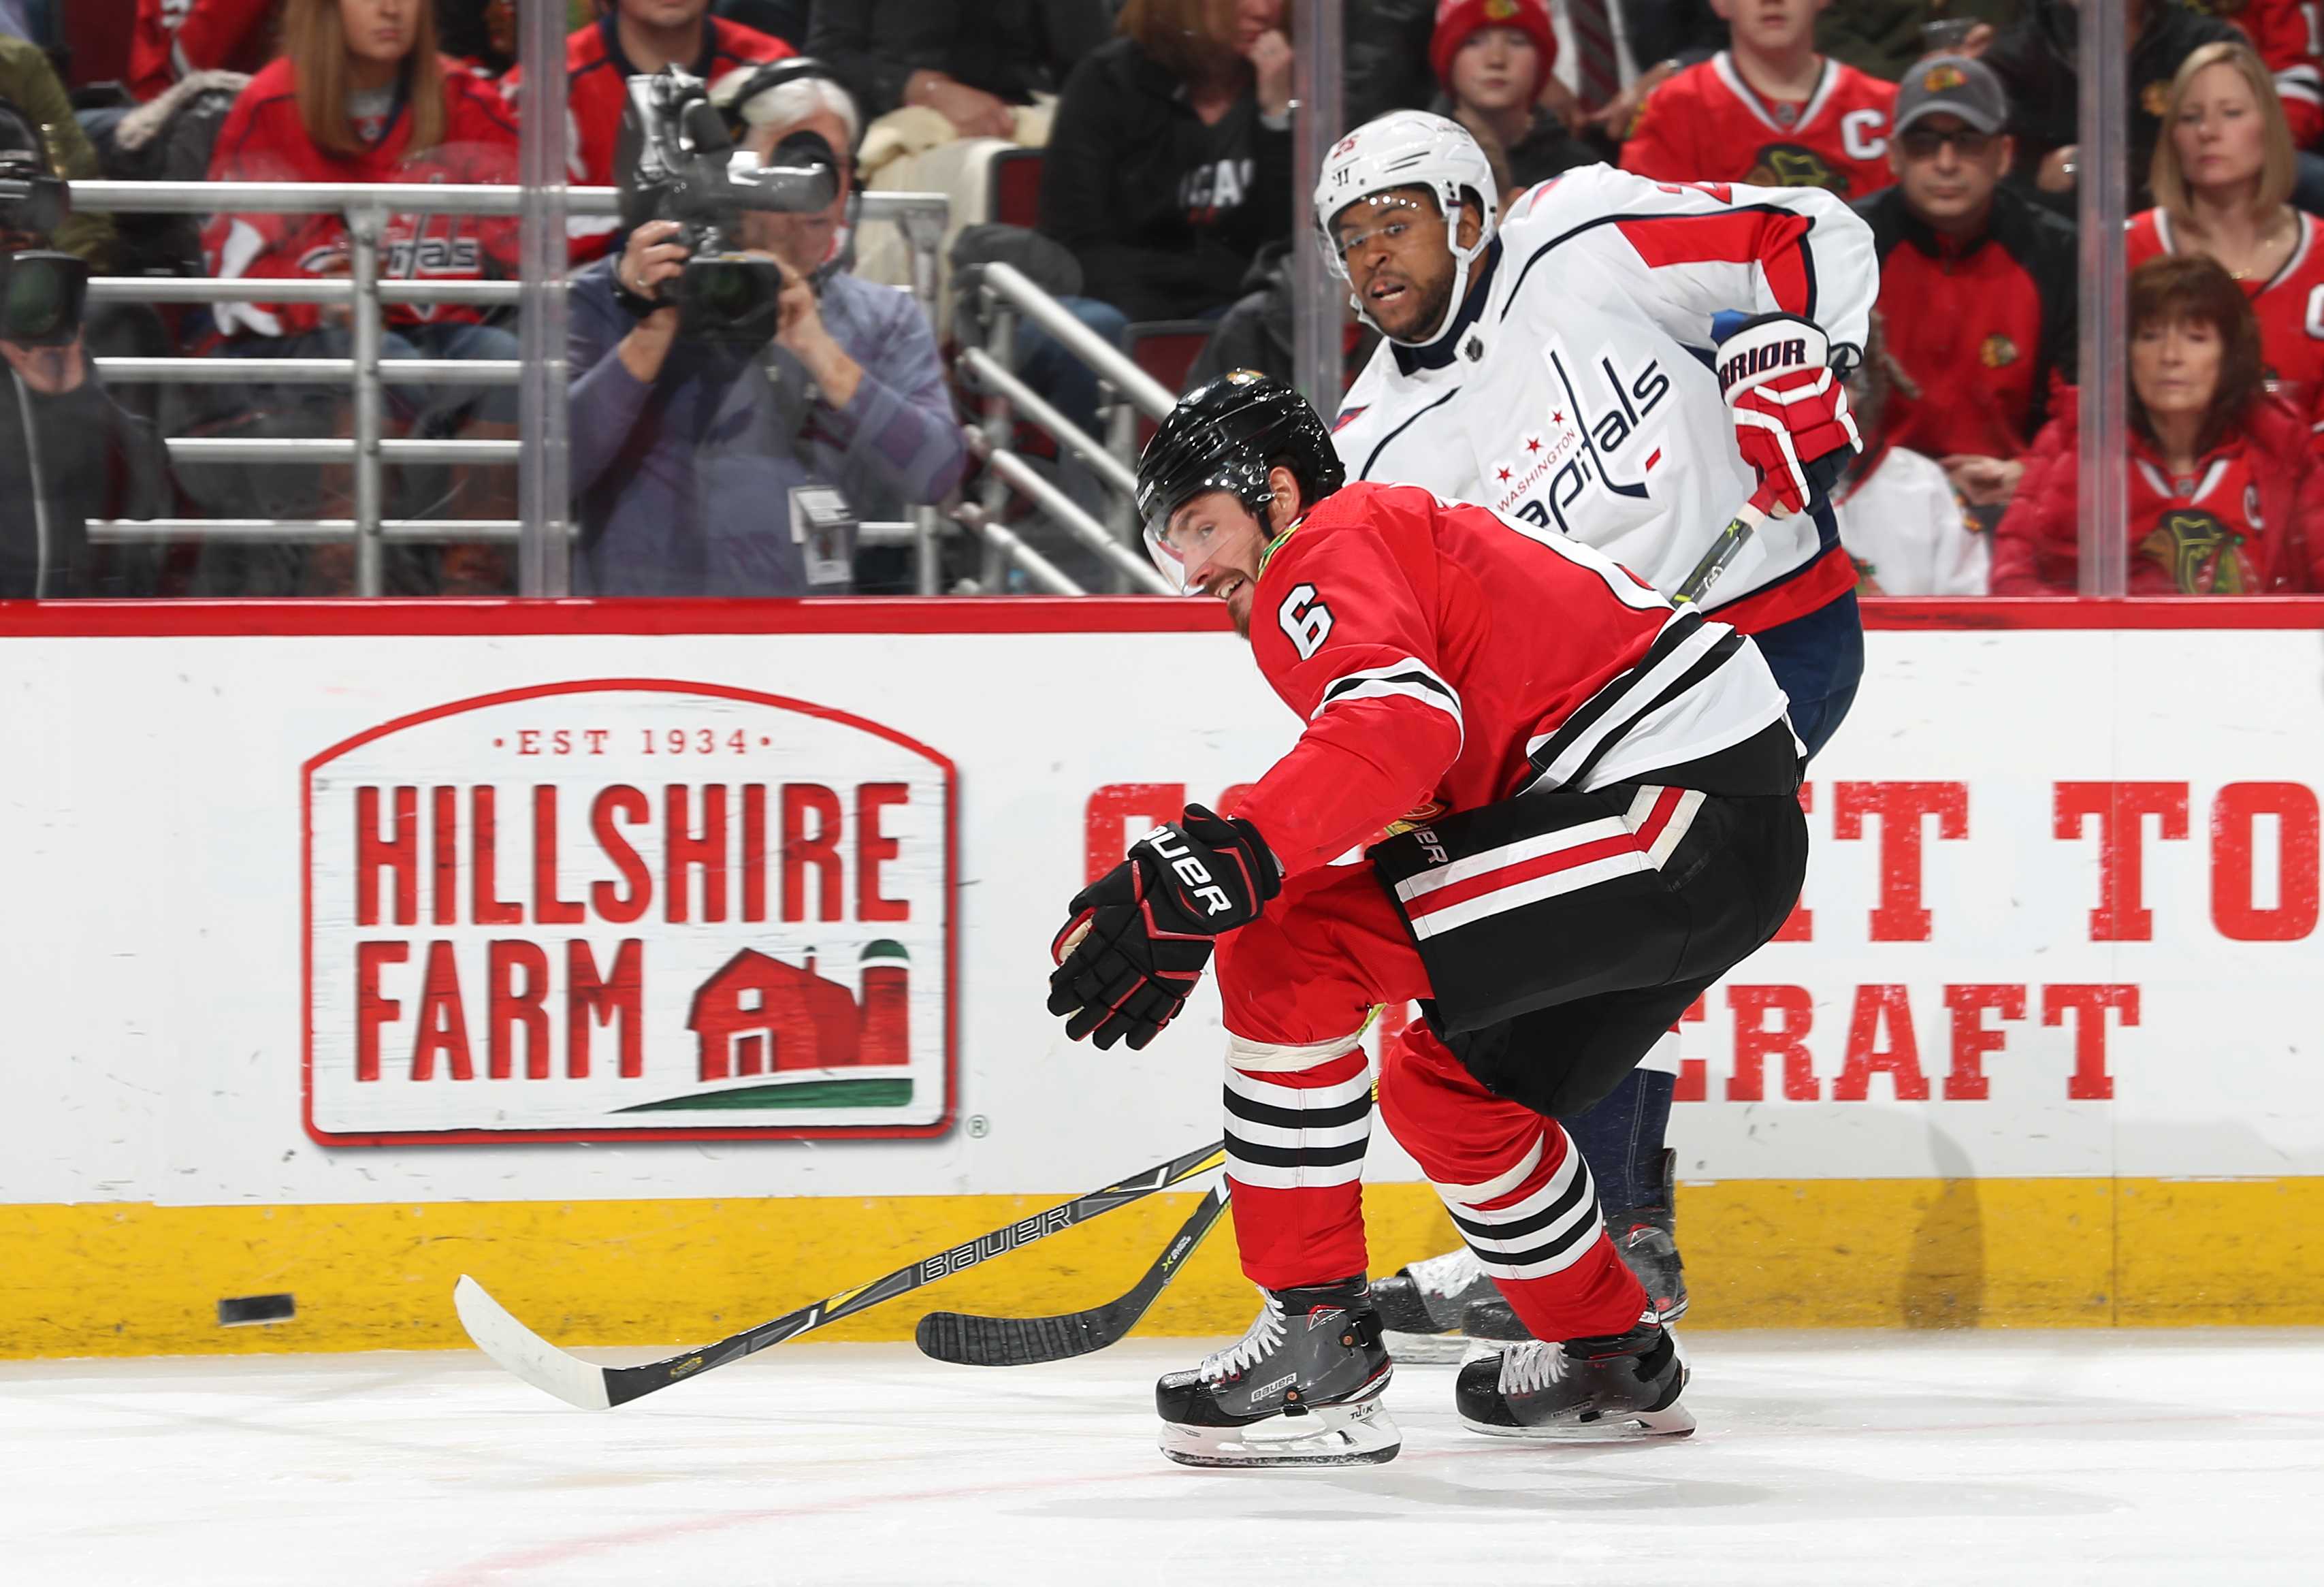 Black NHL player Devante Smith-Pelly taunted by Chicago fans